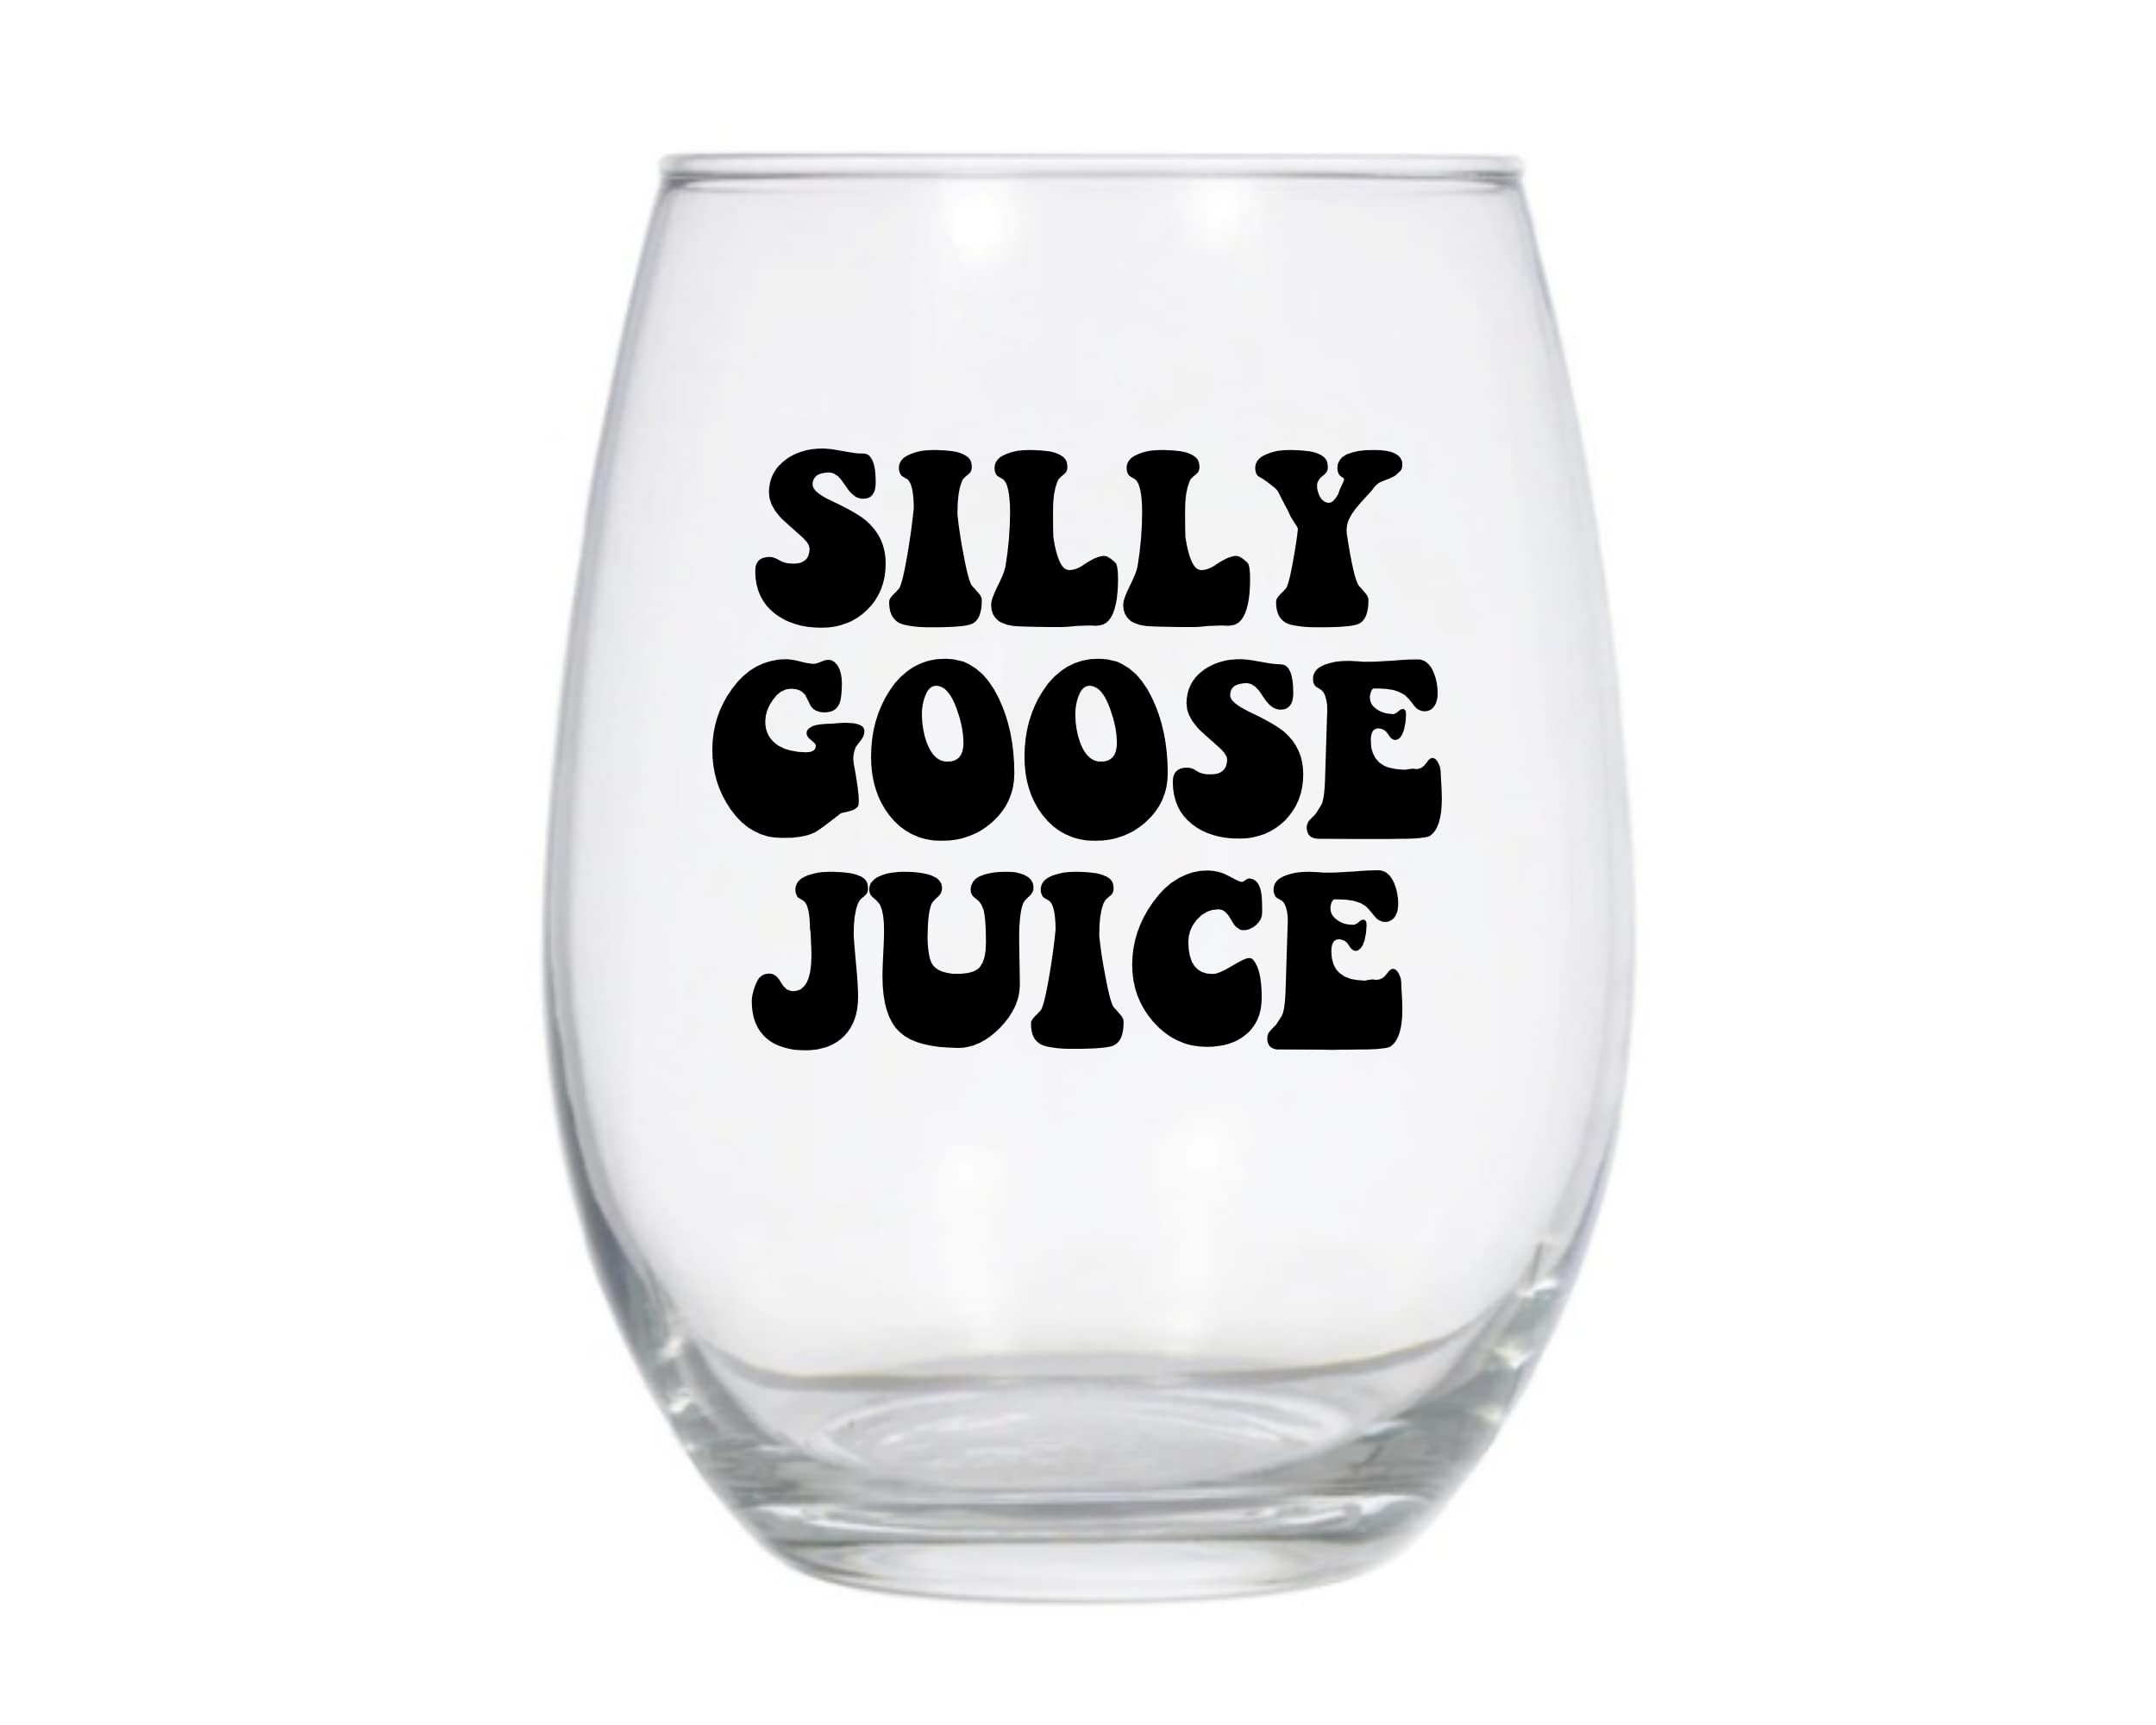 Silly Goose Juice Wine Glass, Funny Goose Gift, Funny Meme Gift -21oz